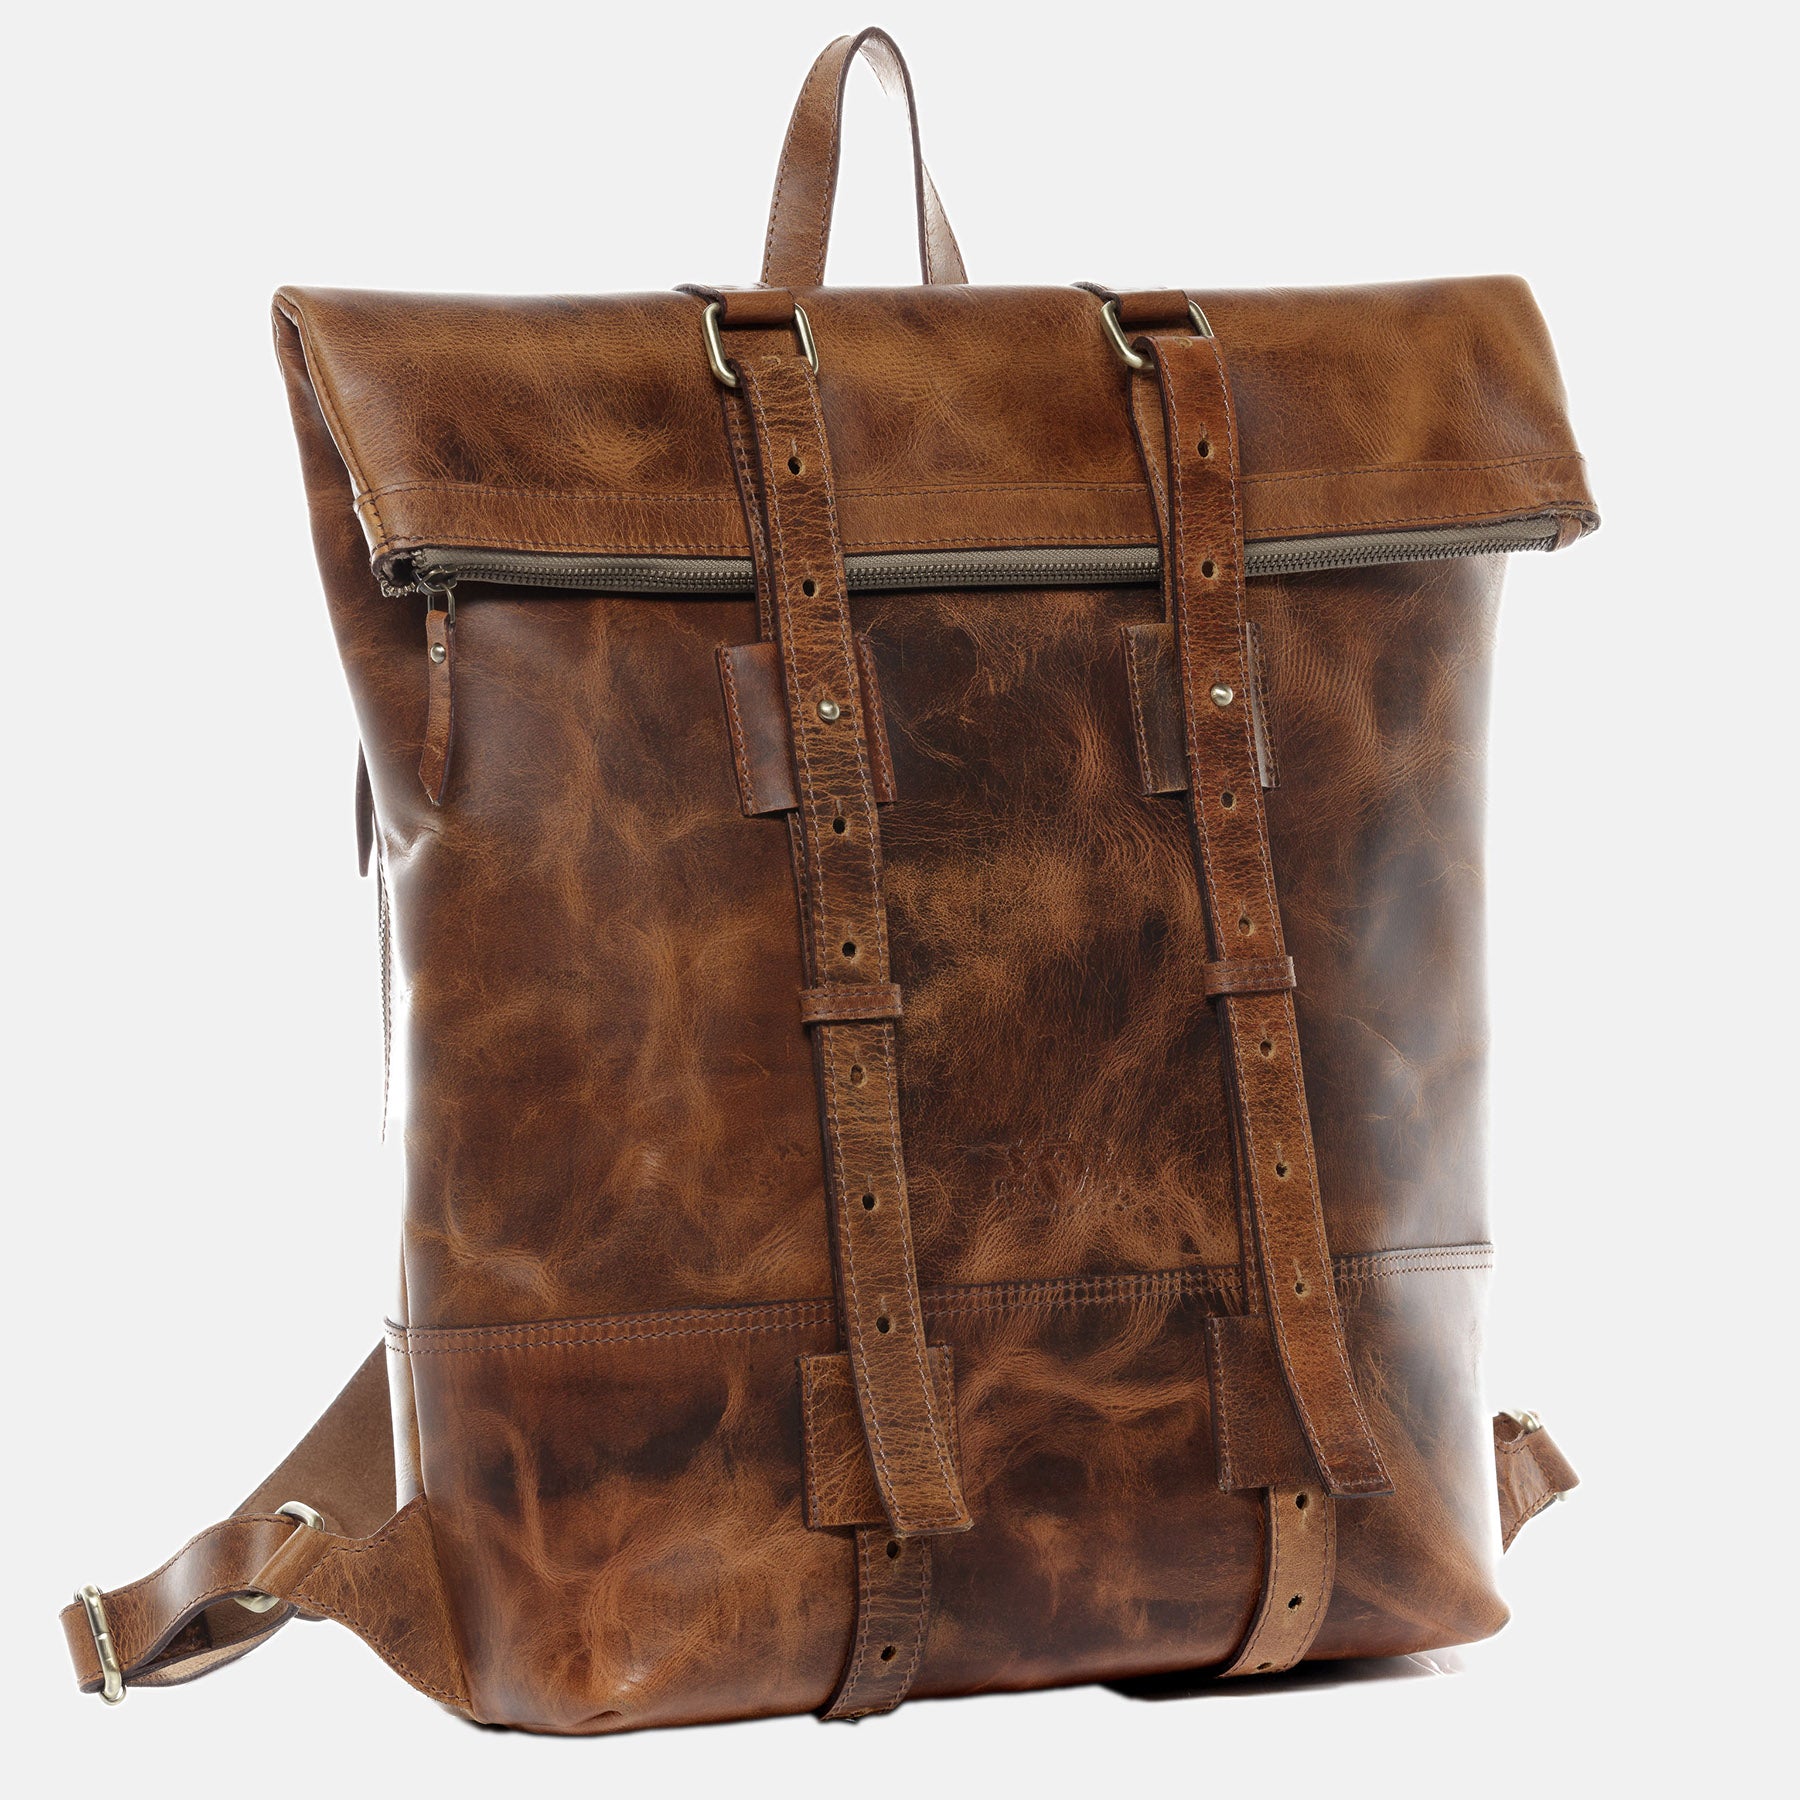 Rolltop backpack CHAZ buffalo leather